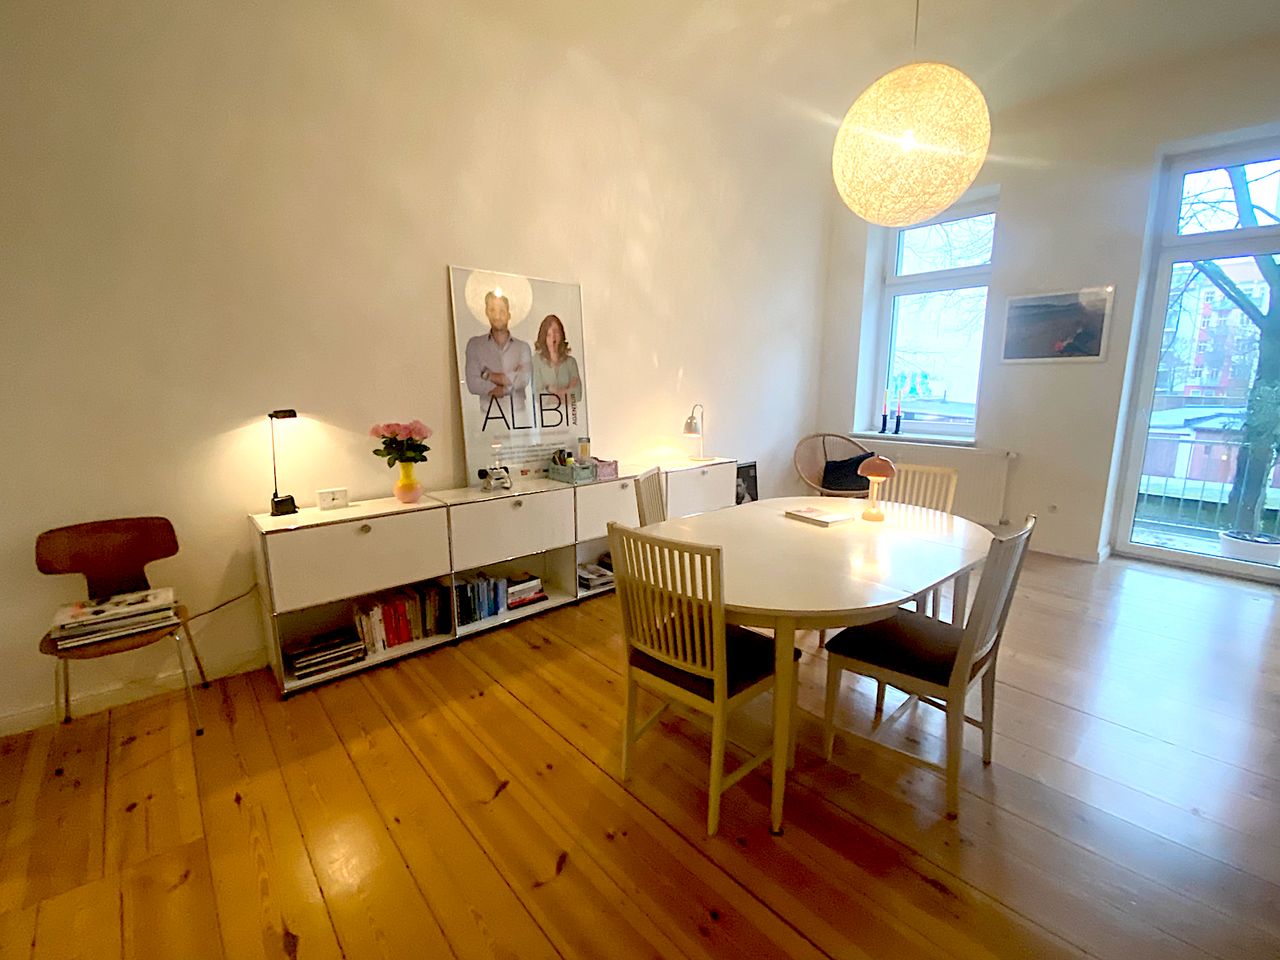 URBAN LIVING - Stylishly furnished design apartment. A quiet oasis in the vibrant area Friedrichshain.